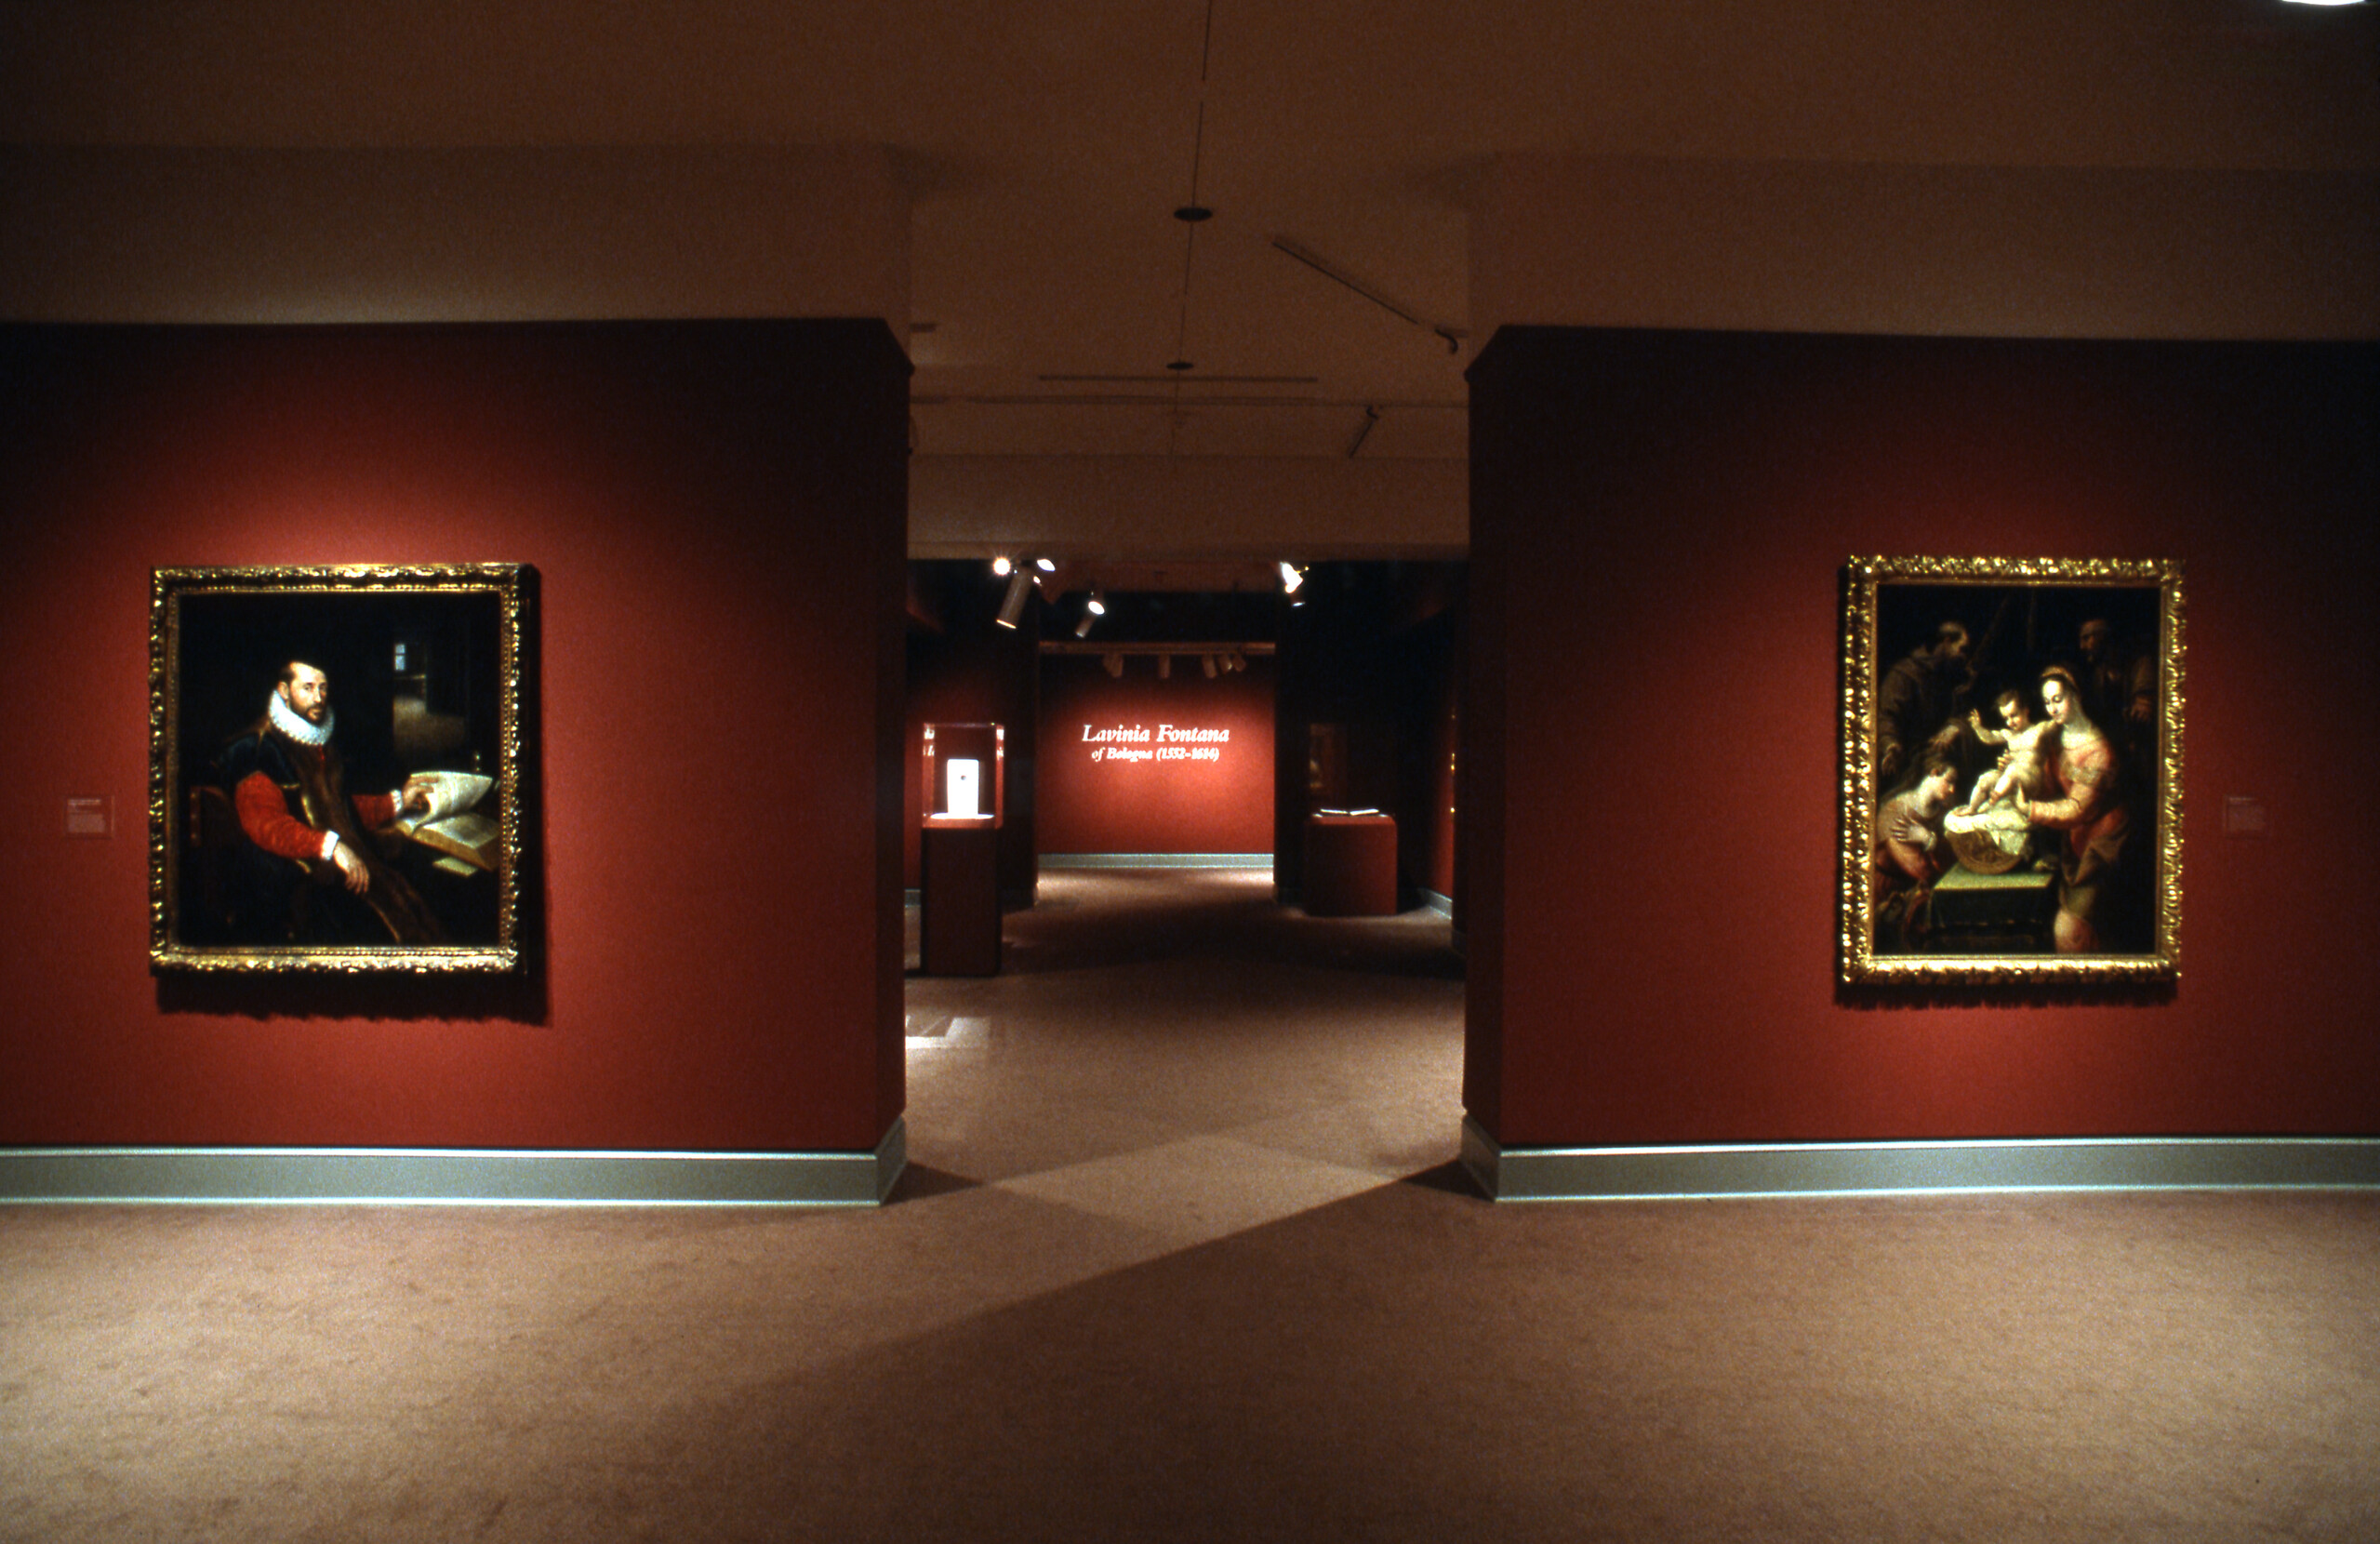 A view of an exhibition space with red walls. Several oil paintings are hanging on opposite walls. They are portraits of men and women in sixteenth-century garments.